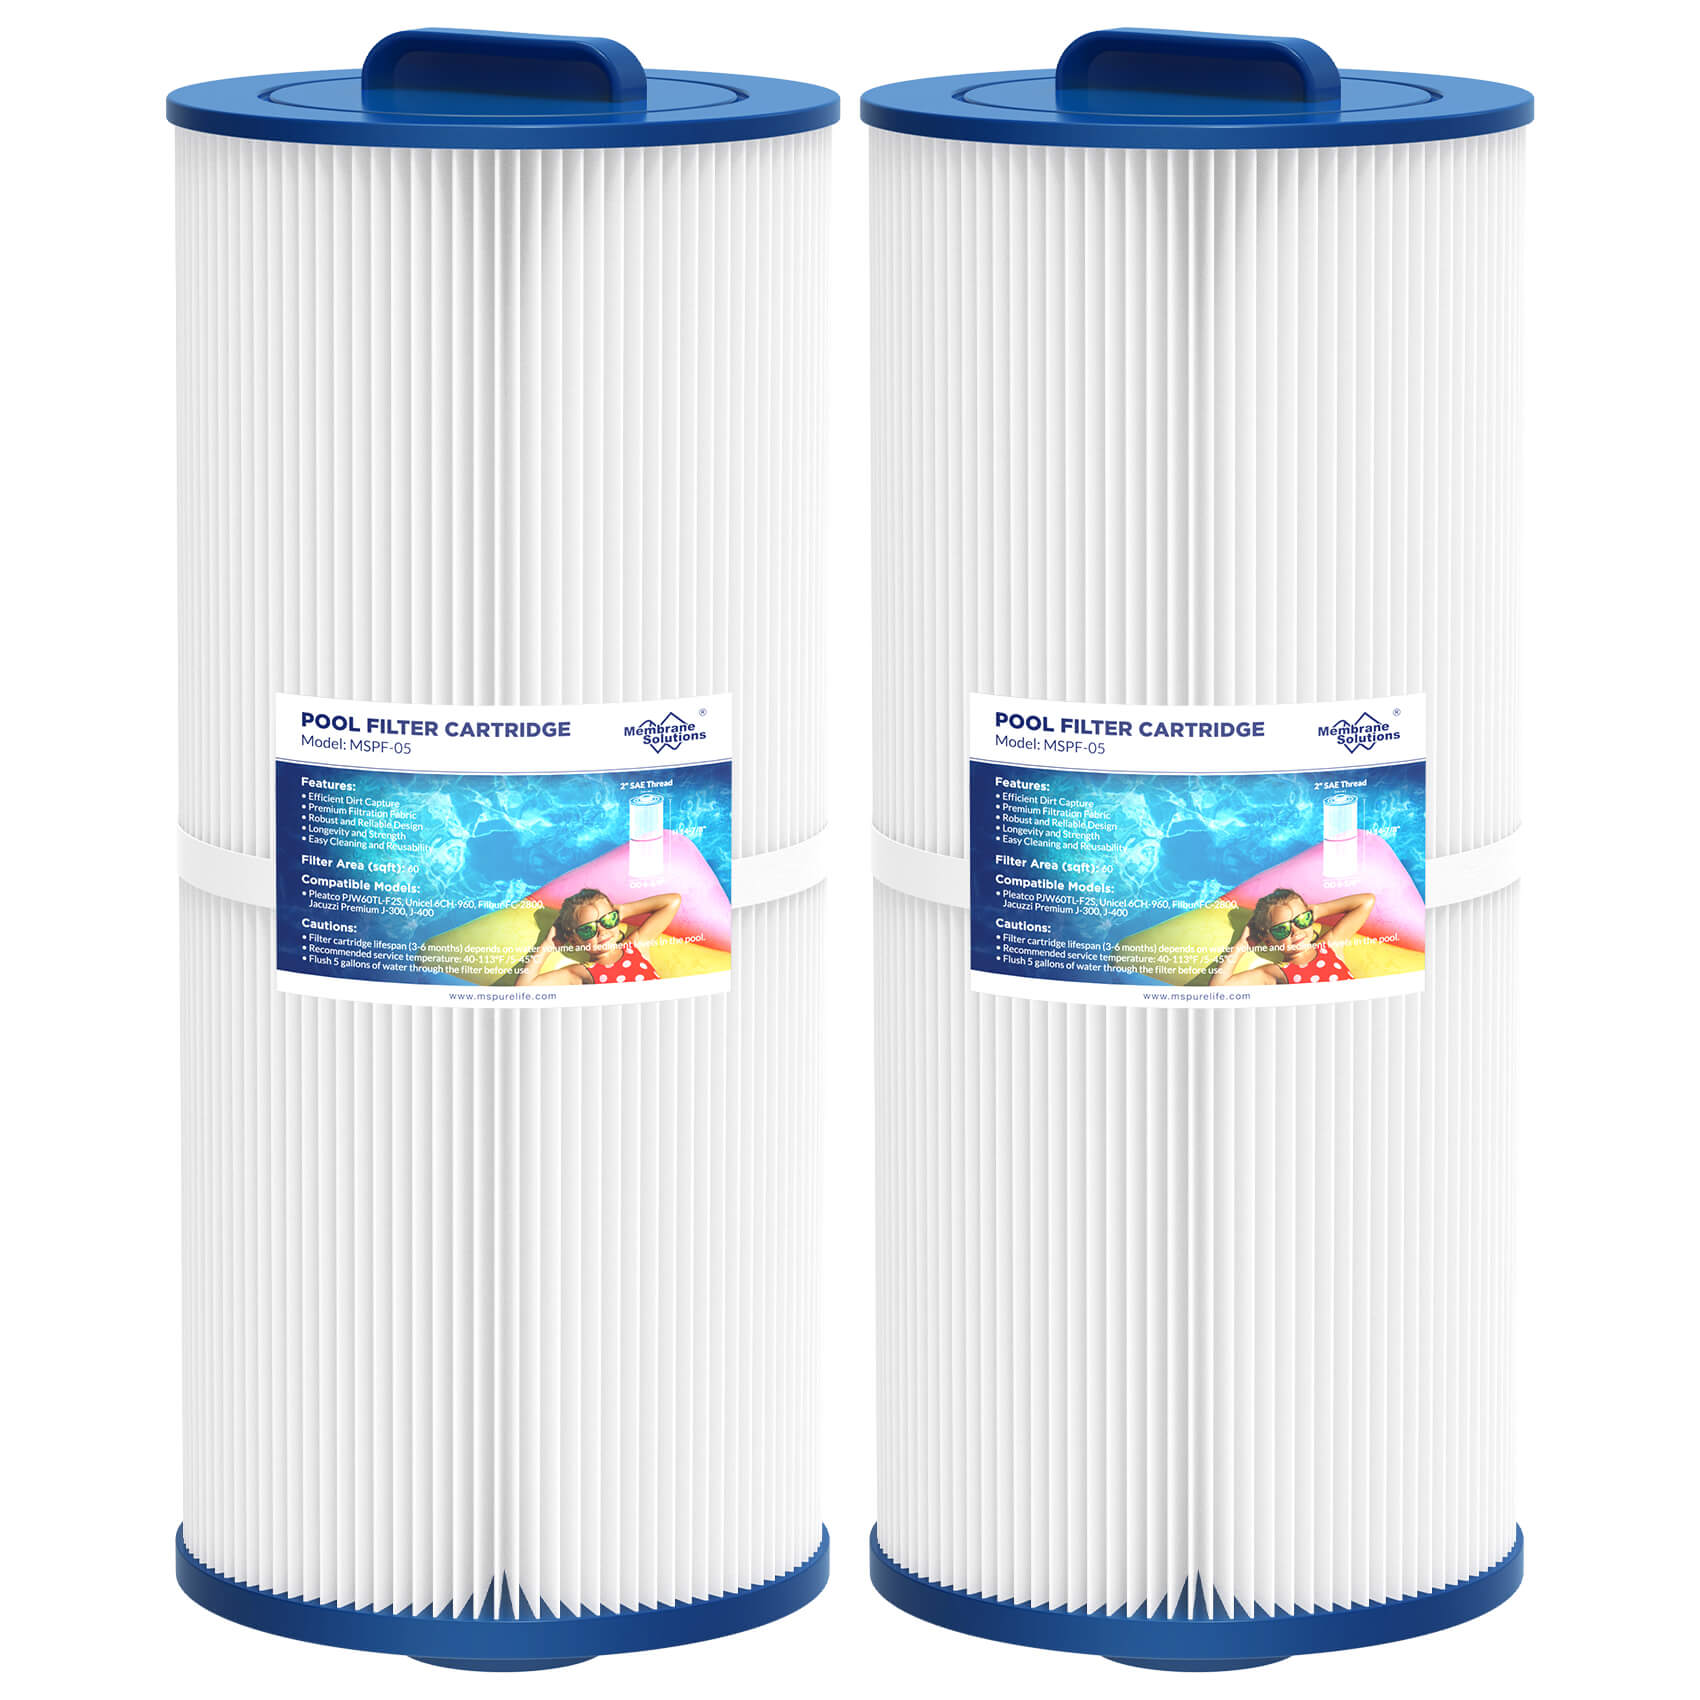 Membrane Solutions F5 Large Pool Filter Cartridge Replacement for PJW60TL-F2S Jacuzzi J300 J400